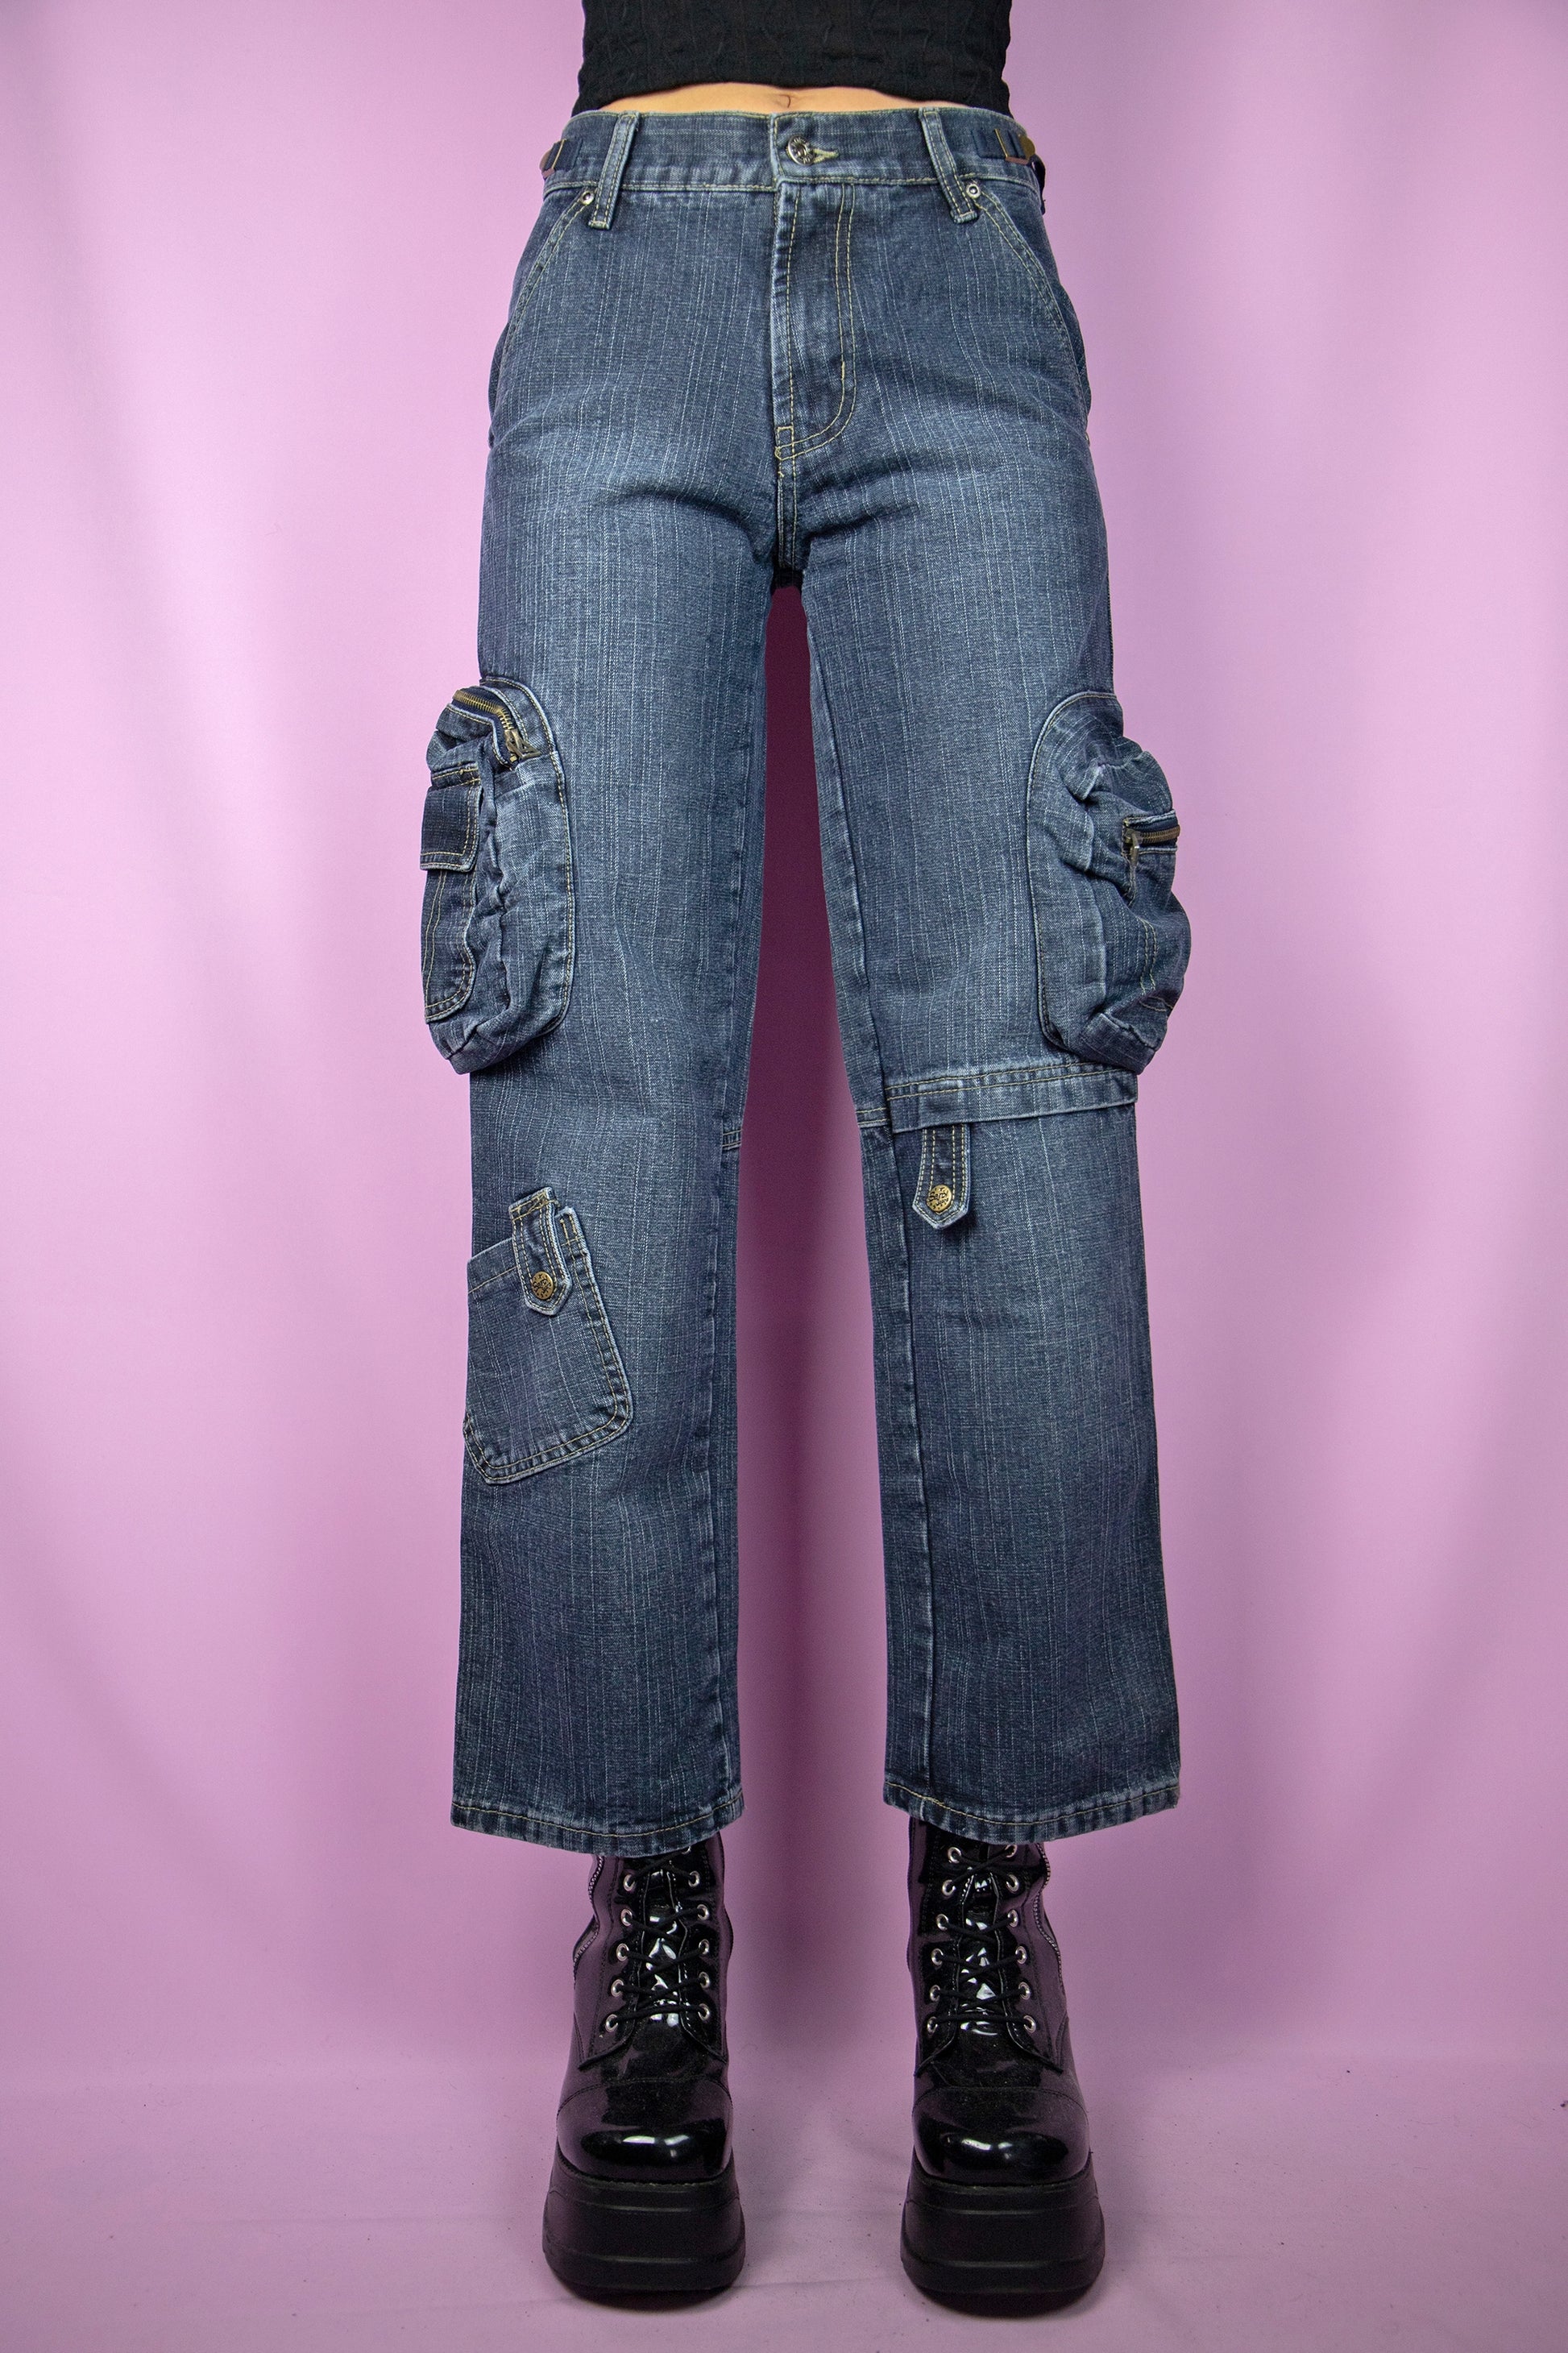 The Y2K Cargo Wide Jeans are vintage 2000s mid-rise utility dark denim pants with pockets.